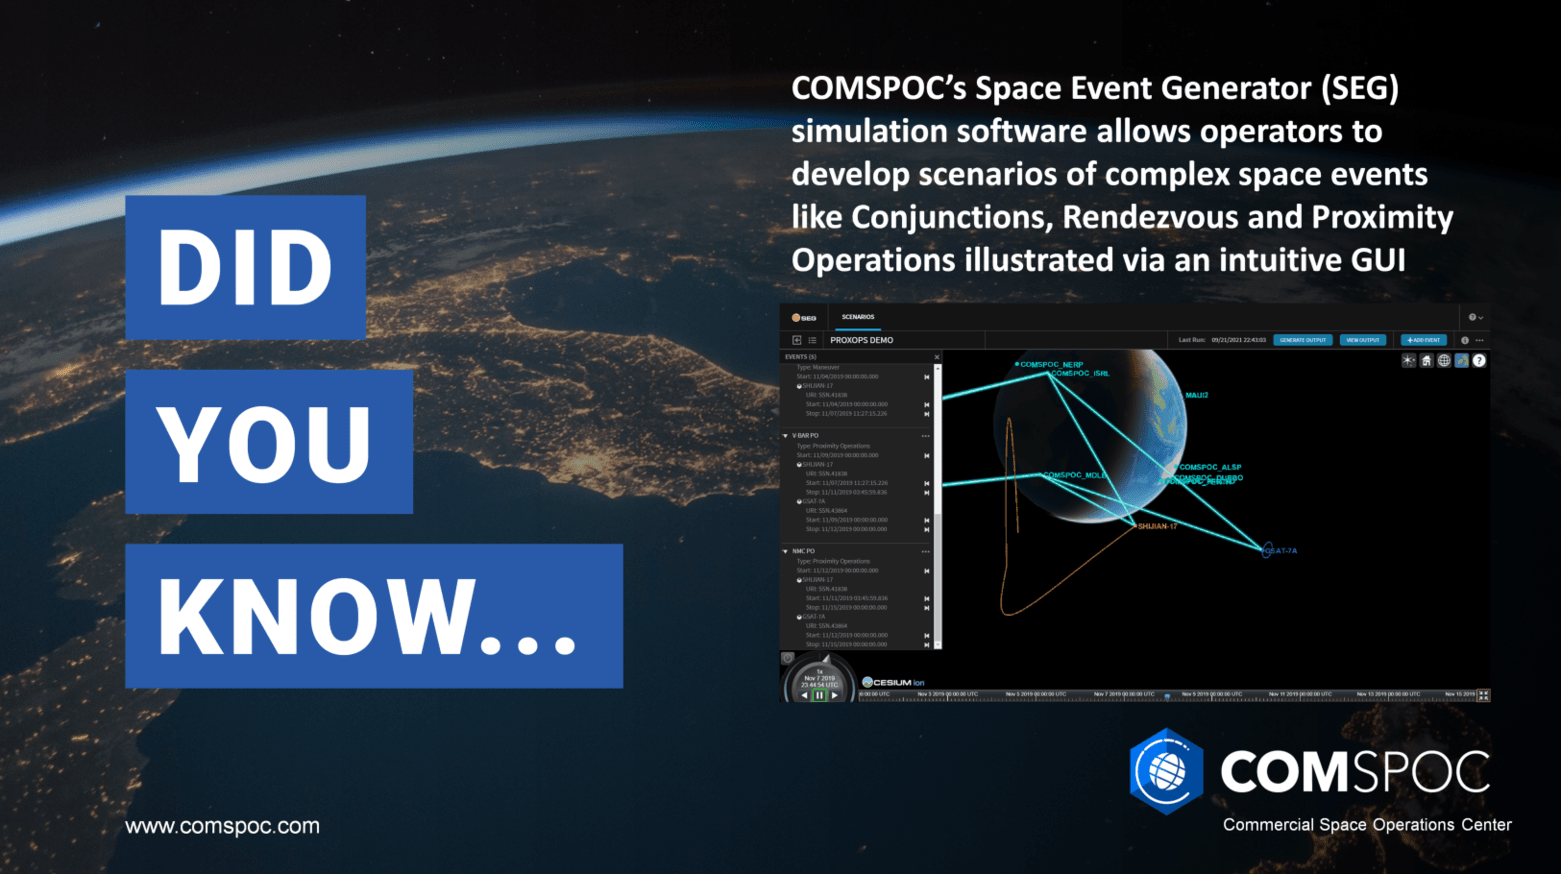 Did You Know: COMSPOC's Space Event Generator (SEG) simulation software allows operators to develop scenarios of complex space events like Conjunctions, Rendezvous and Proximity Operations ilustrated via an intuitive GUI.